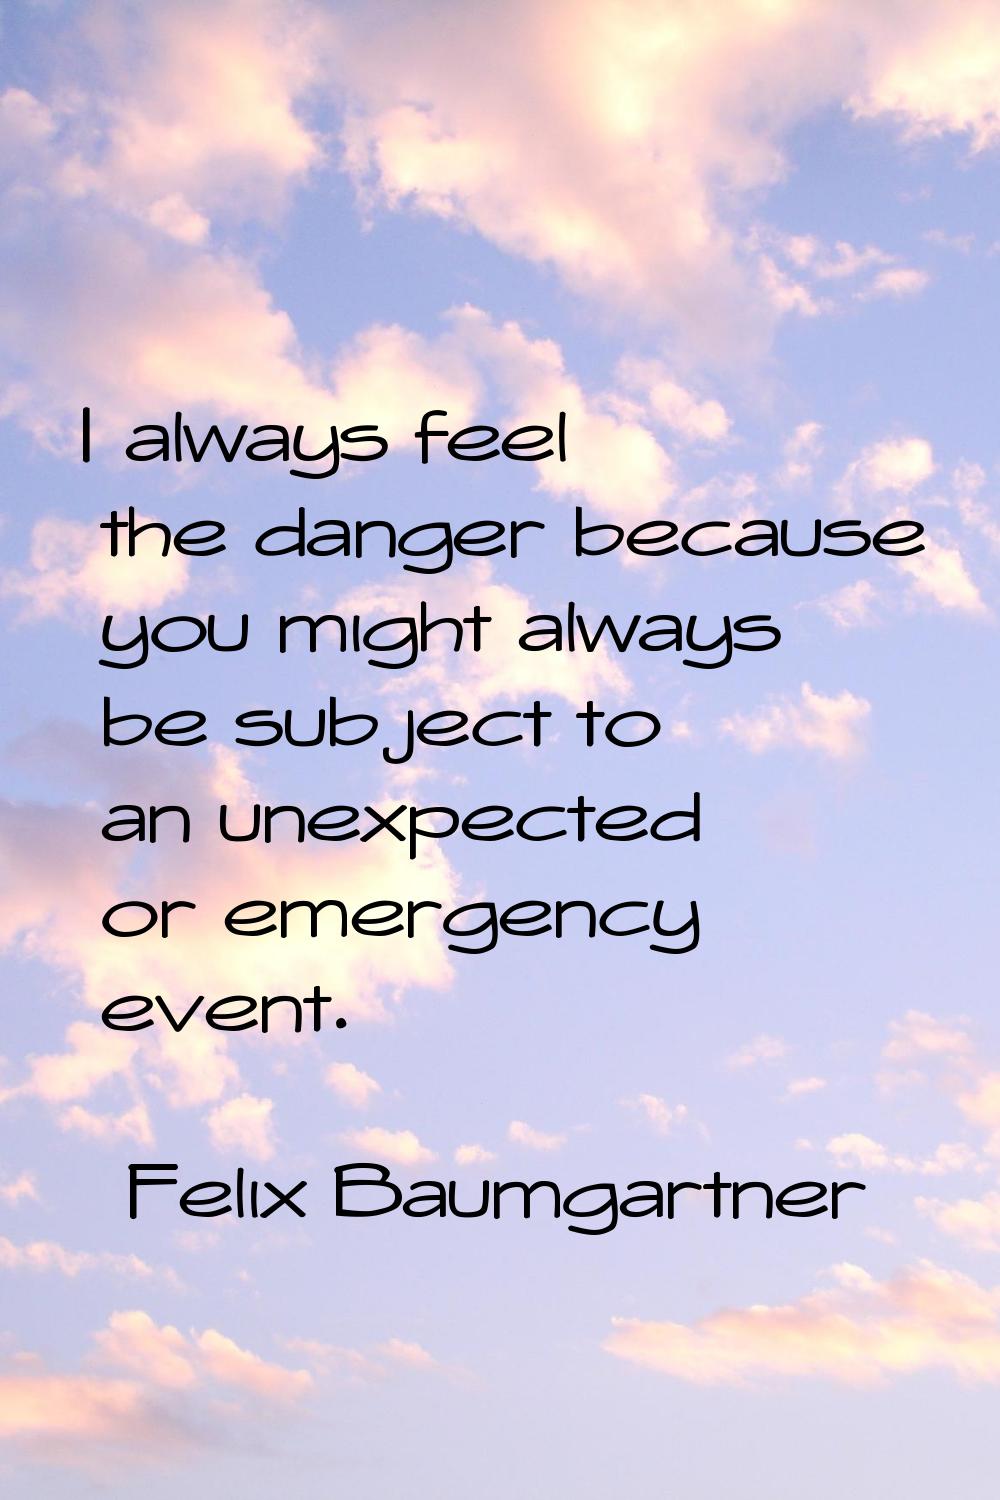 I always feel the danger because you might always be subject to an unexpected or emergency event.